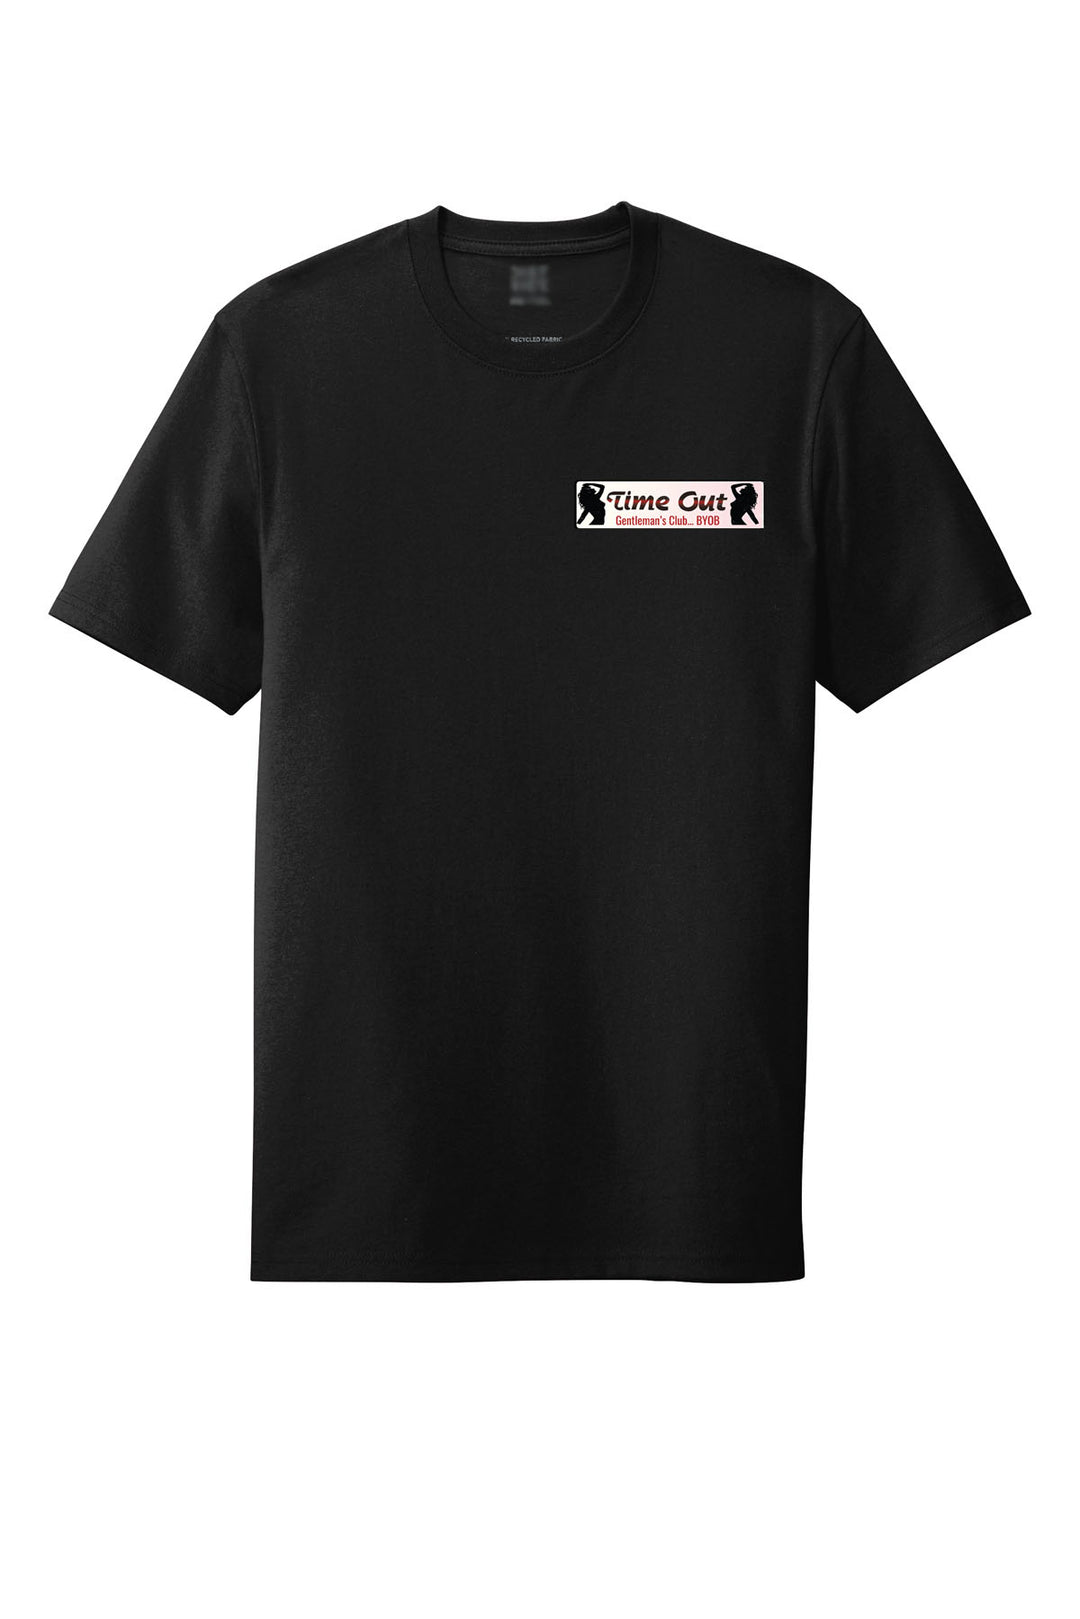 The Timeout T-Shirt